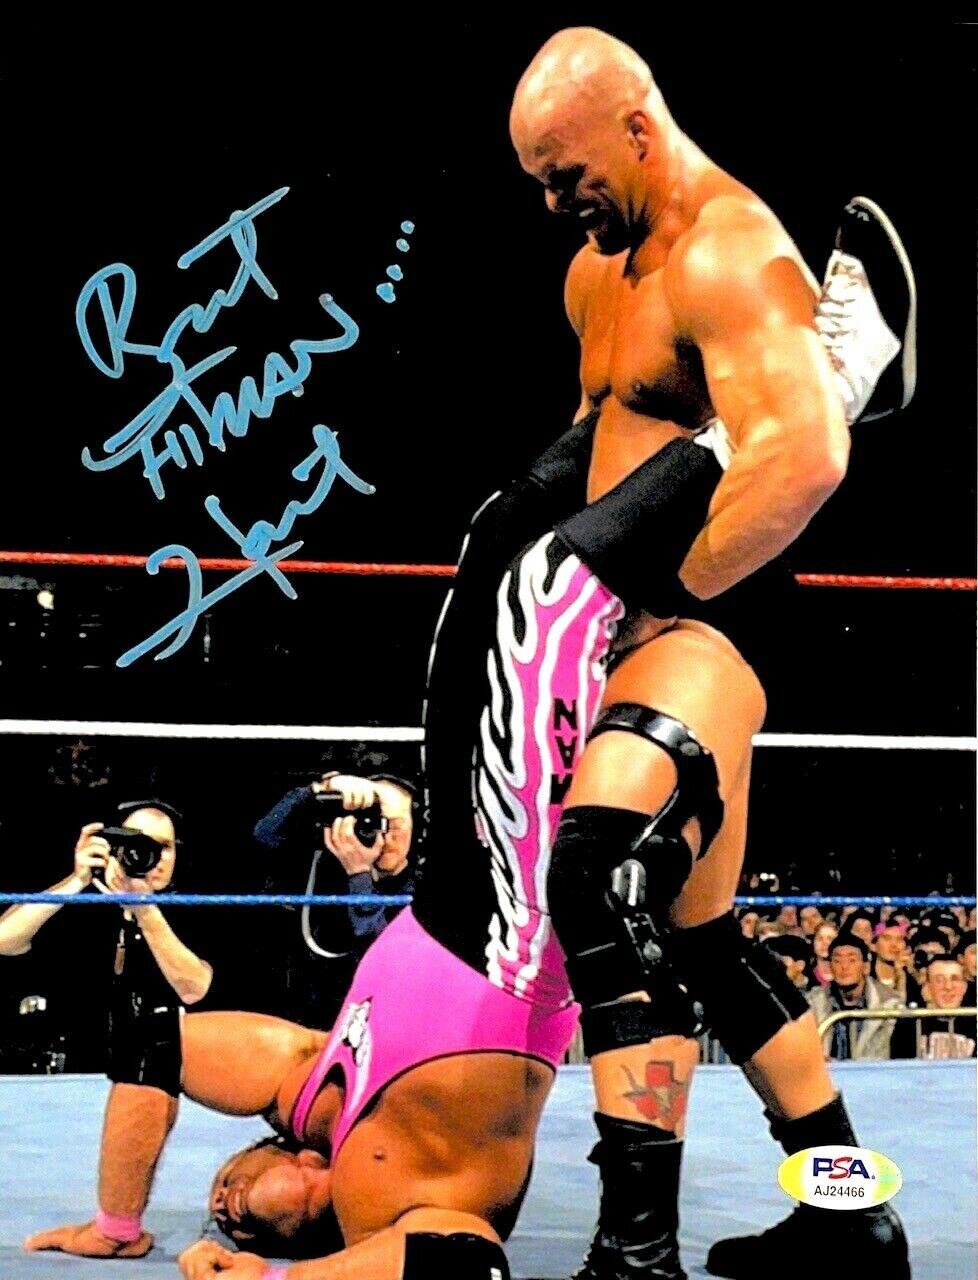 WWE BRET HART HAND SIGNED AUTOGRAPHED 8X10 WRESTLING Photo Poster painting WITH PSA DNA COA 5